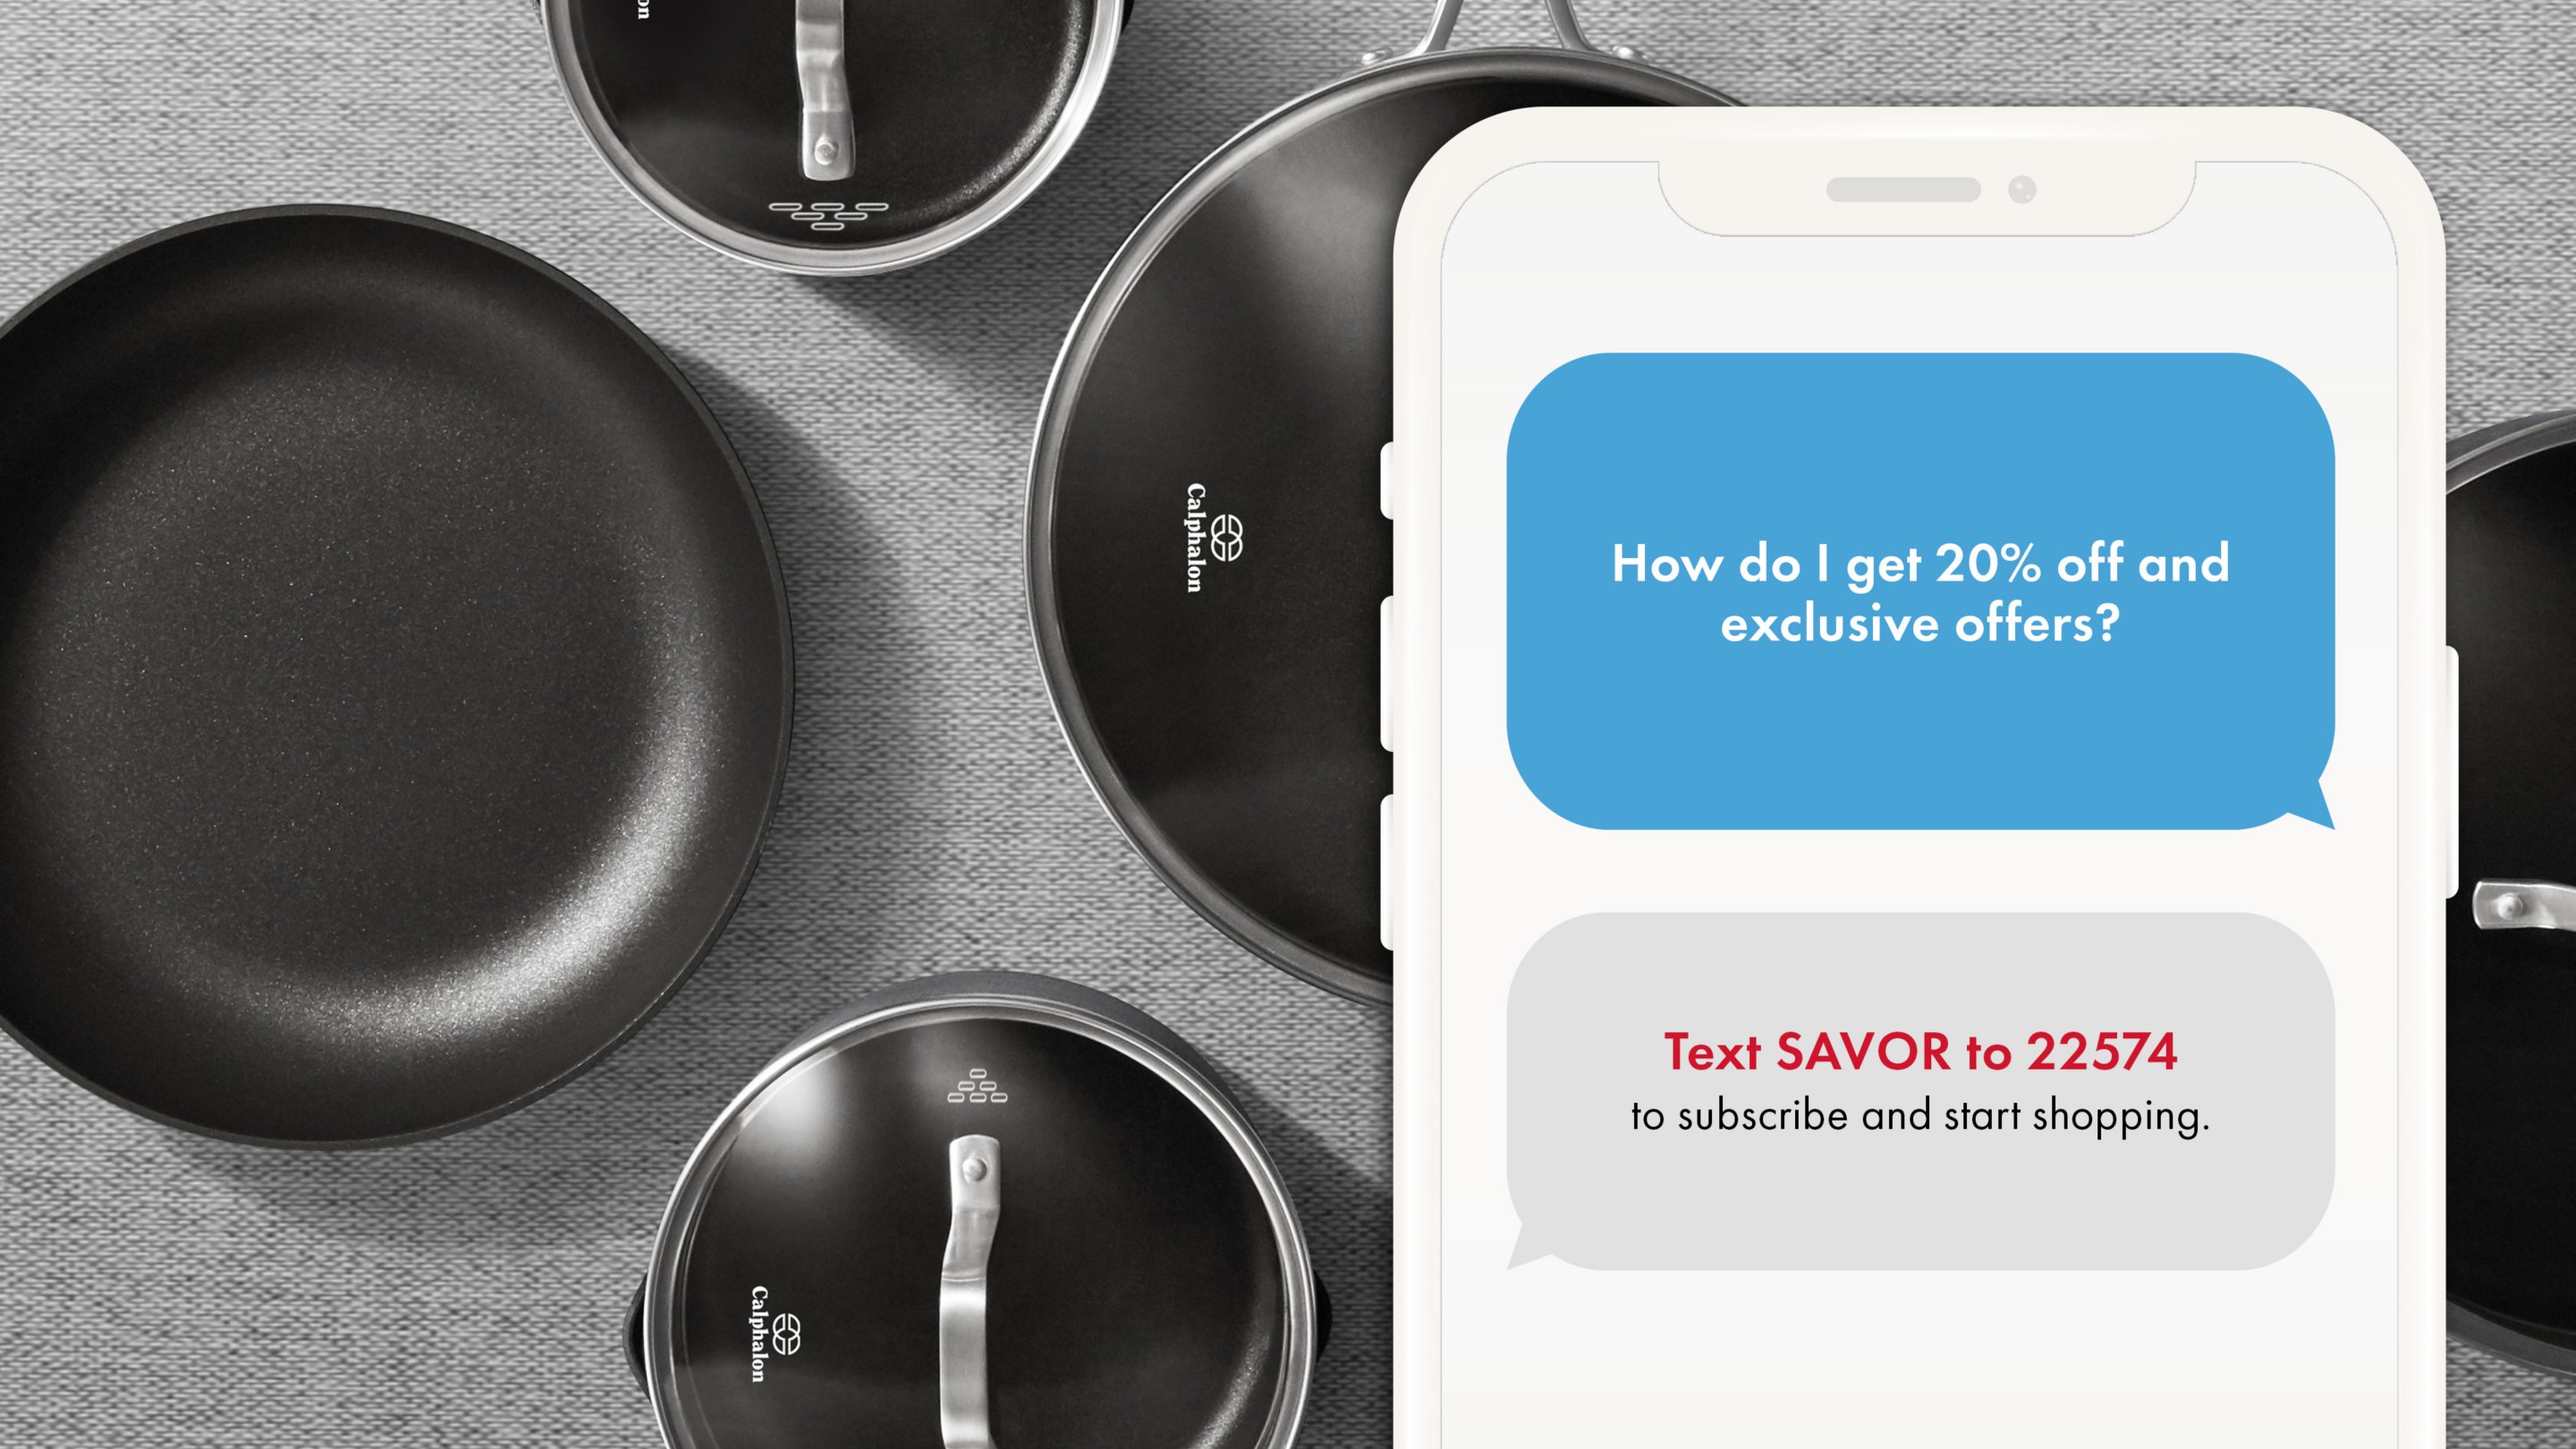 Text SAVOR to 22574 to get 20% off and exclusive offers